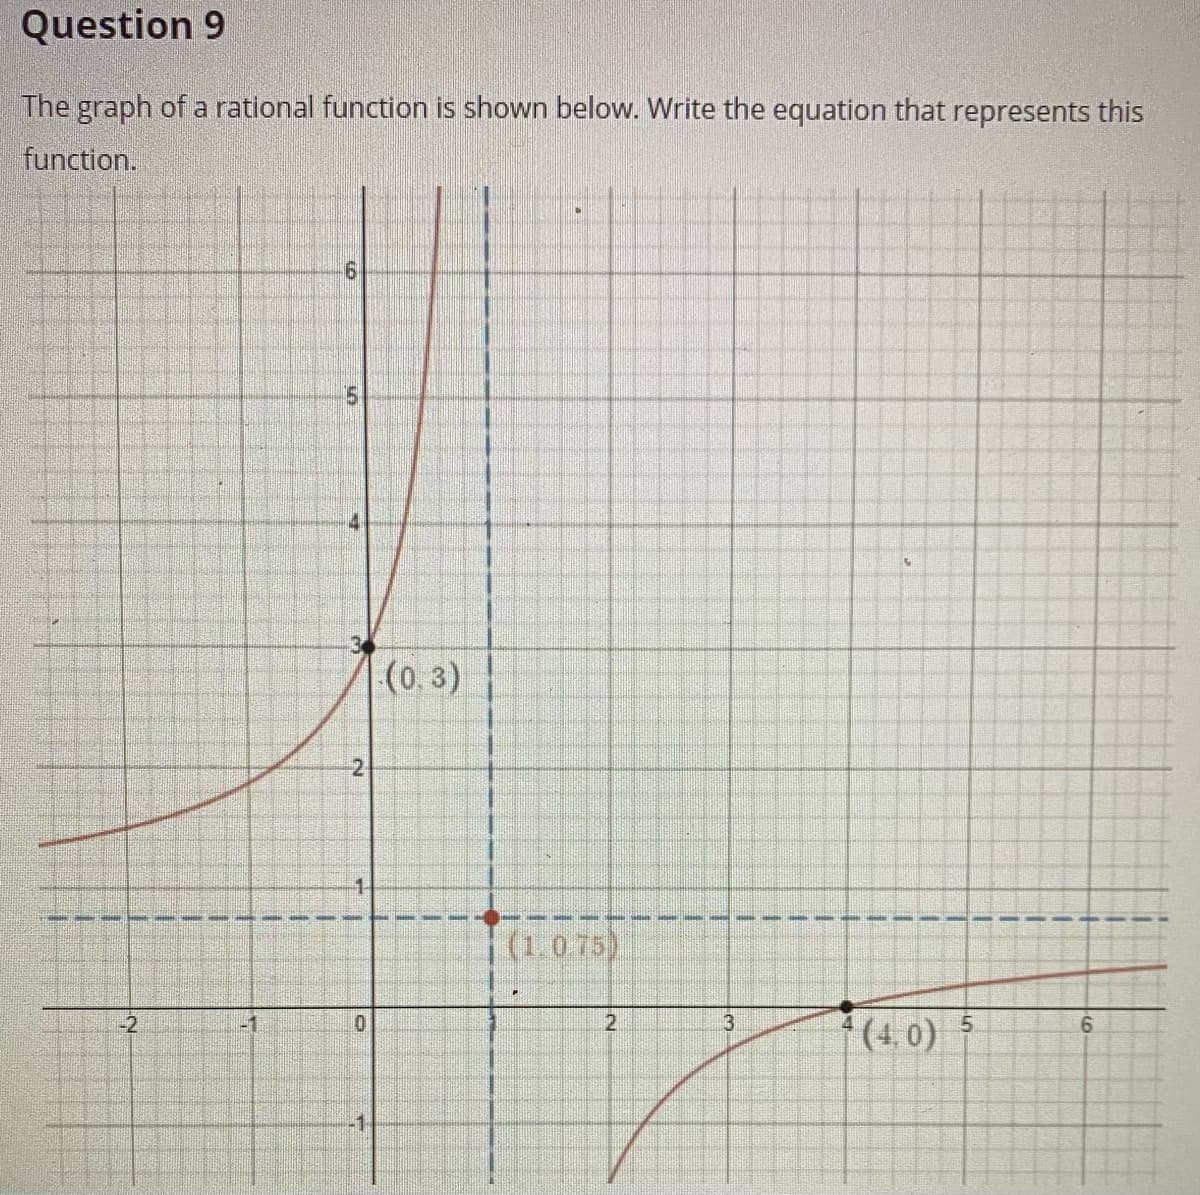 Question 9
The graph of a rational function is shown below. Write the equation that represents this
function.
|(0. 3)
(1.075)
-2
5.
(4.0)
